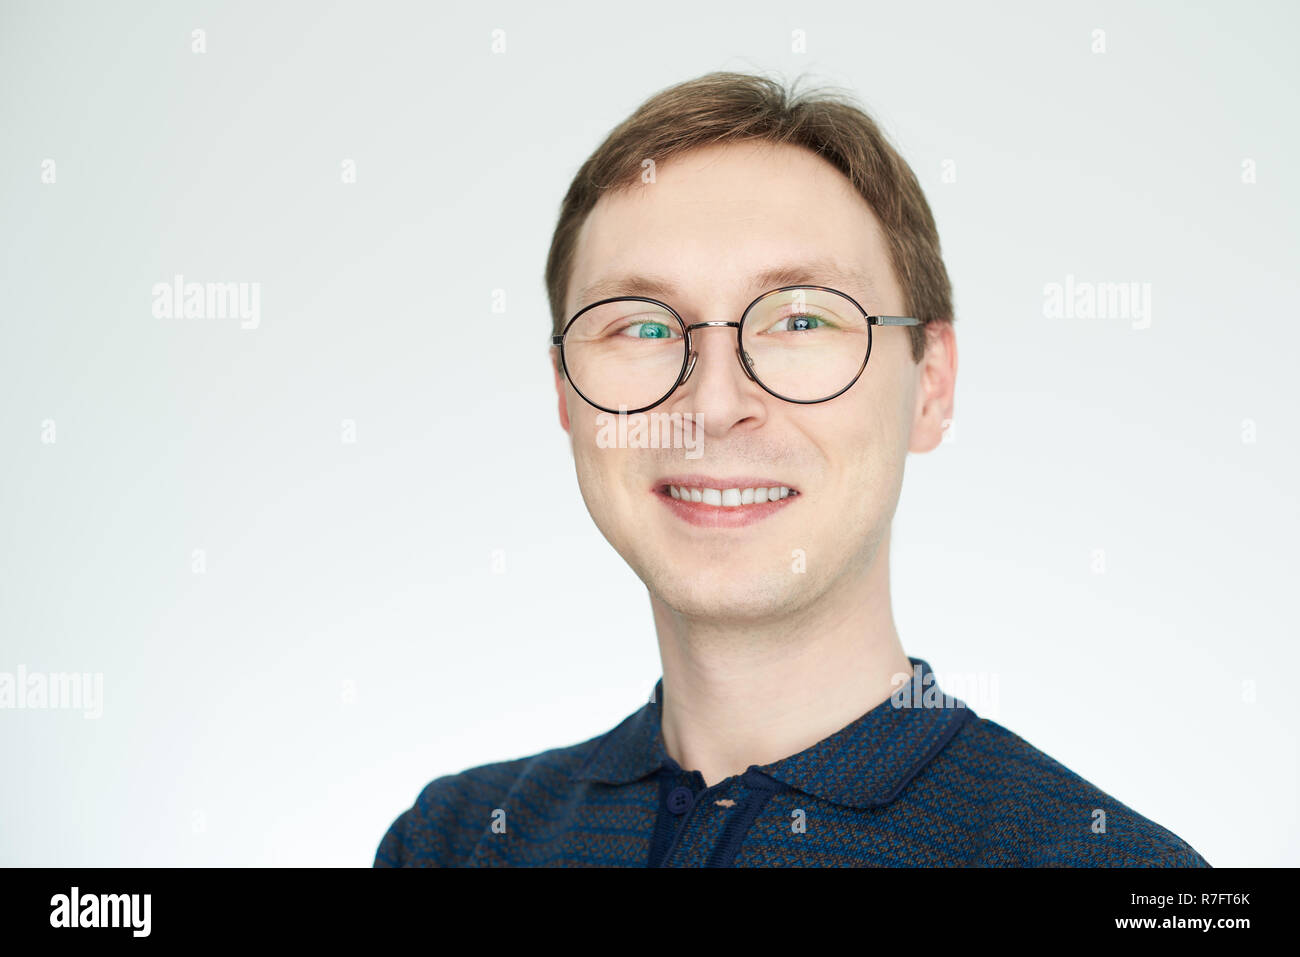 Smart looking young caucasian man wearing glasses isolated on white background Stock Photo